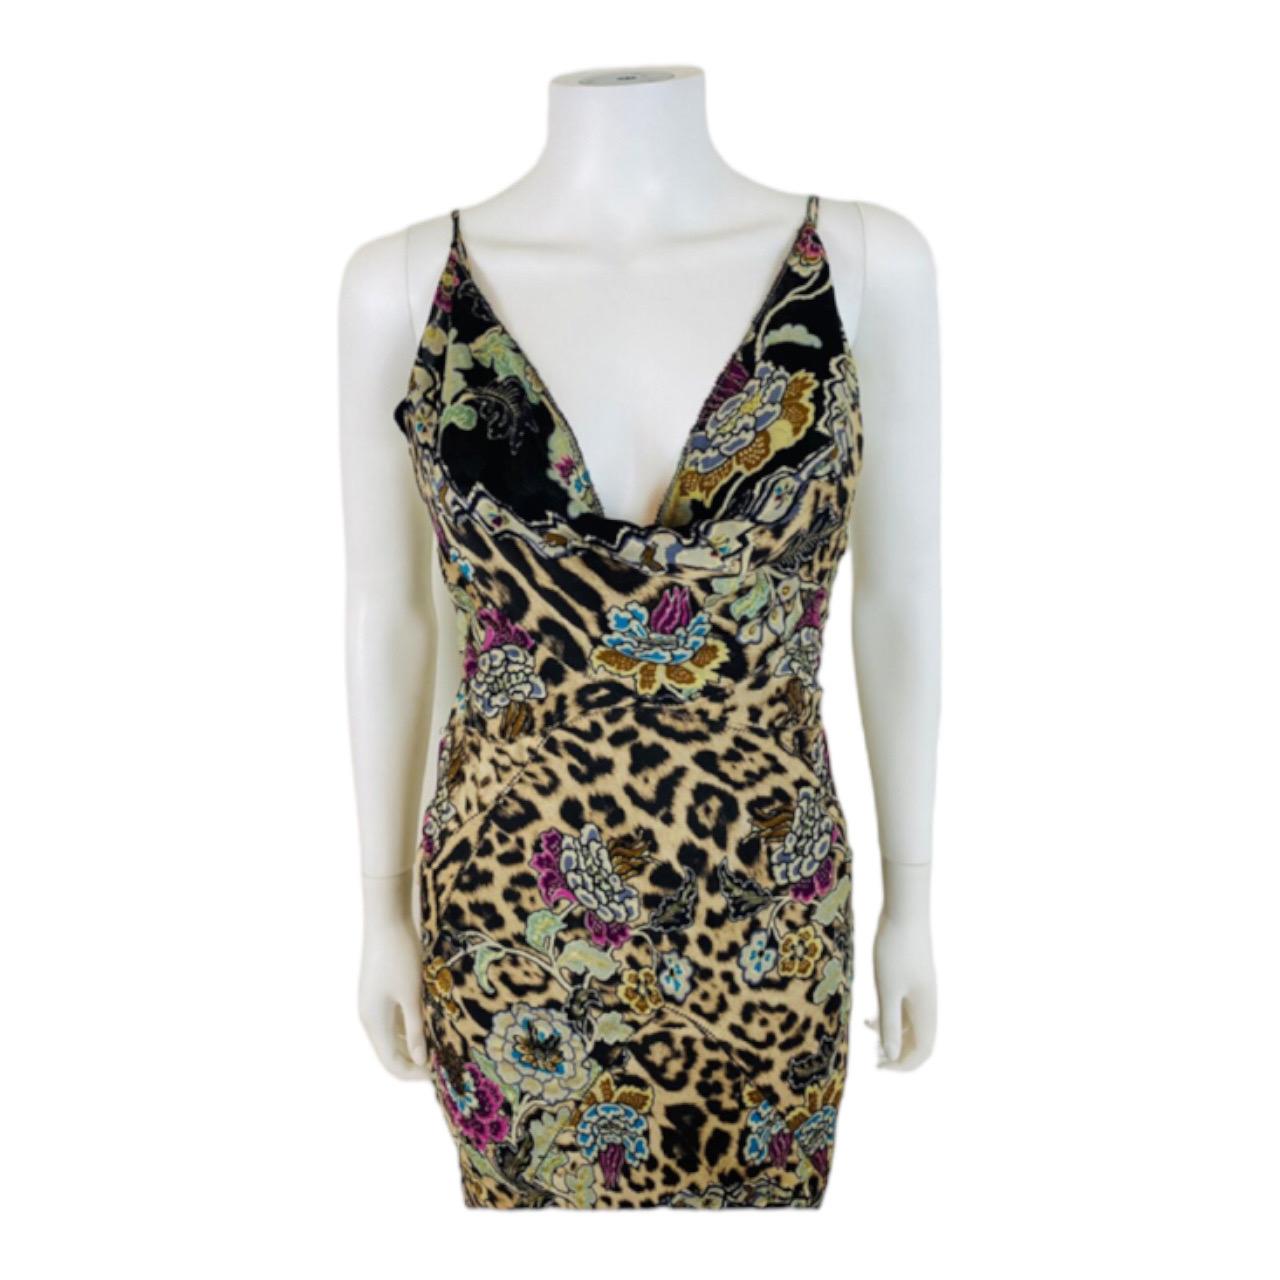 Vintage S/S 2003 Roberto Cavalli Black Chinoiserie Leopard Floral Dress Gown In Excellent Condition For Sale In Denver, CO